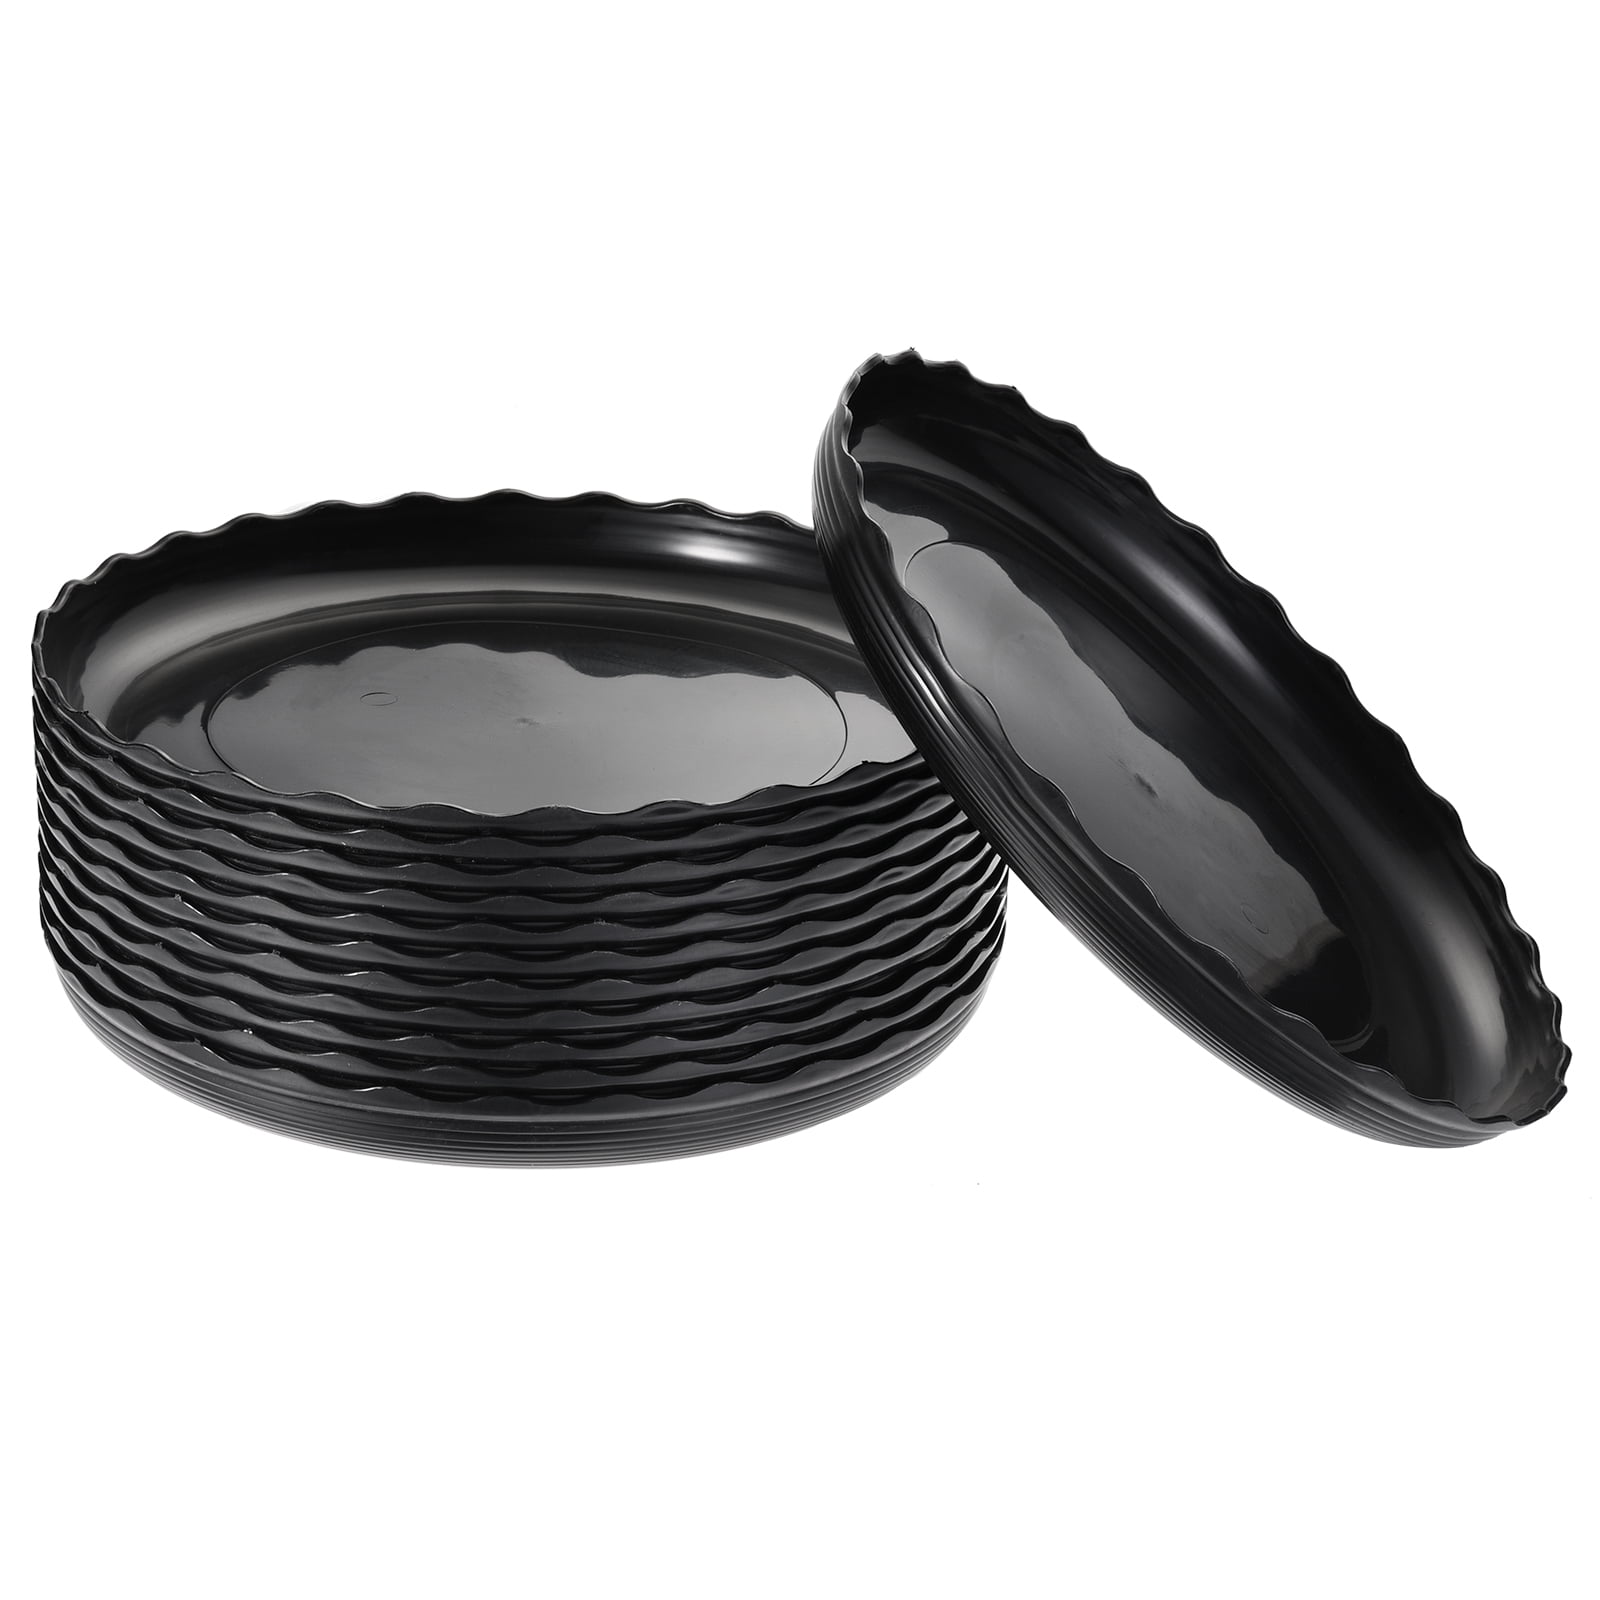 12pcs 12'' Plastic Saucer Round Base Water Drip Tray for Plant Growing 